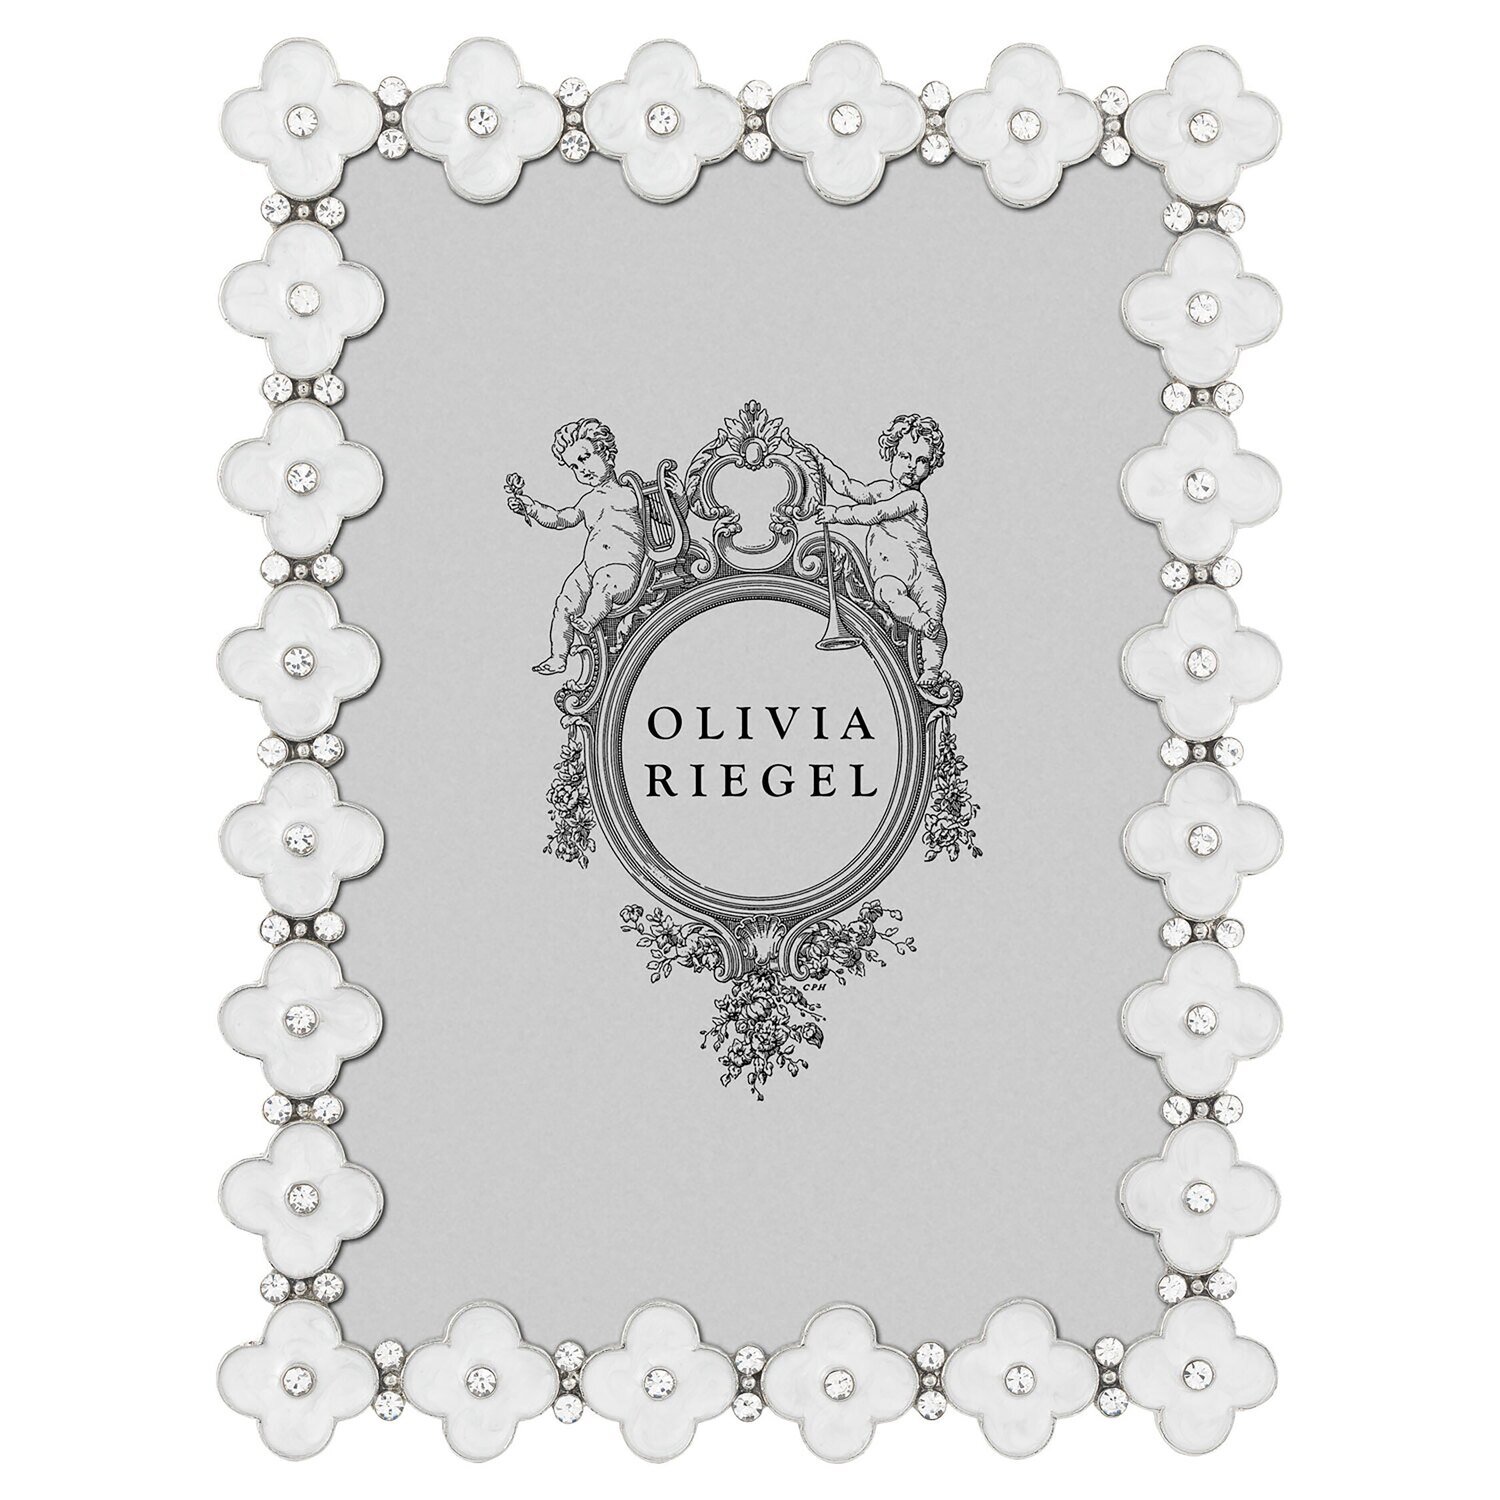 Olivia Riegel White Enamel Clover 5 x 7 Inch Picture Frame RT4875